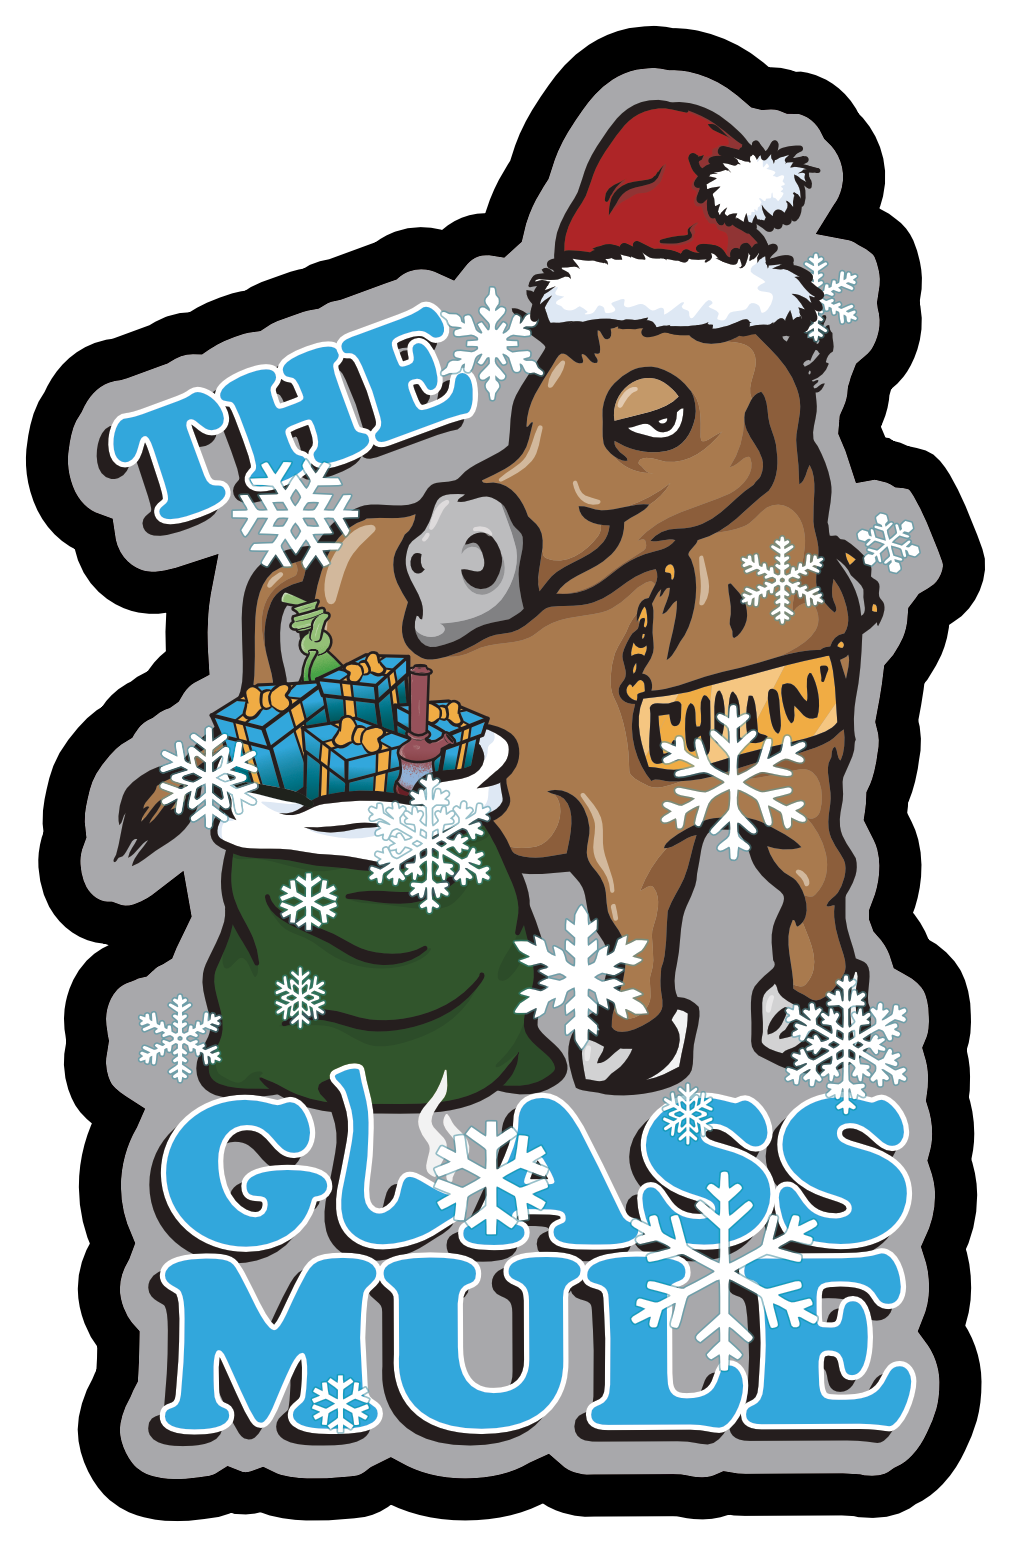 The Glass Mule